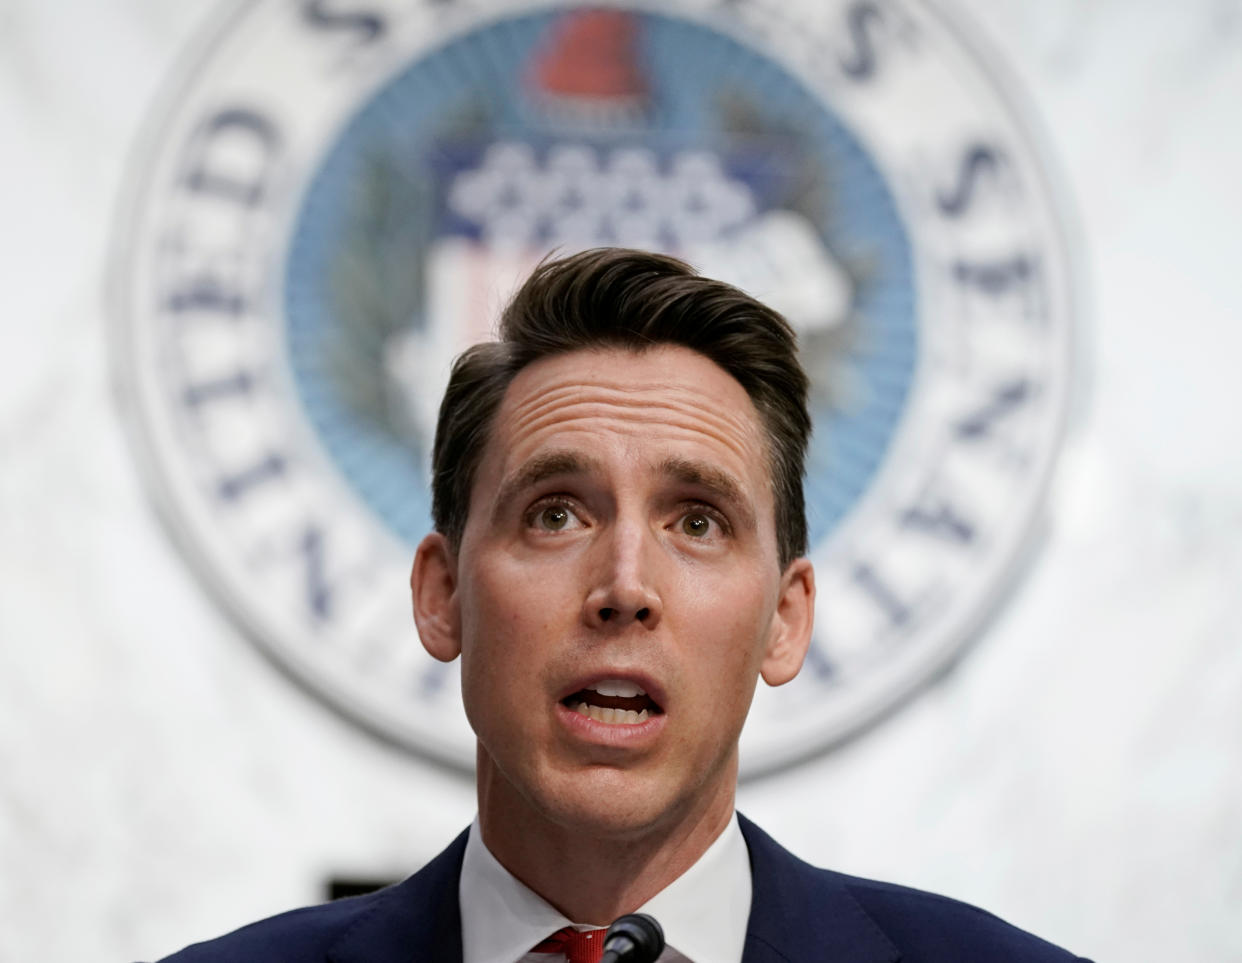 U.S. Senator Josh Hawley (R-MO) speaks during the third day of the confirmation hearing for Supreme Court nominee Judge Amy Coney Barrett before the Senate Judiciary Committee on Capitol Hill in Washington, DC, U.S., October 14, 2020. (Ken Cedeno/Pool via Reuters)